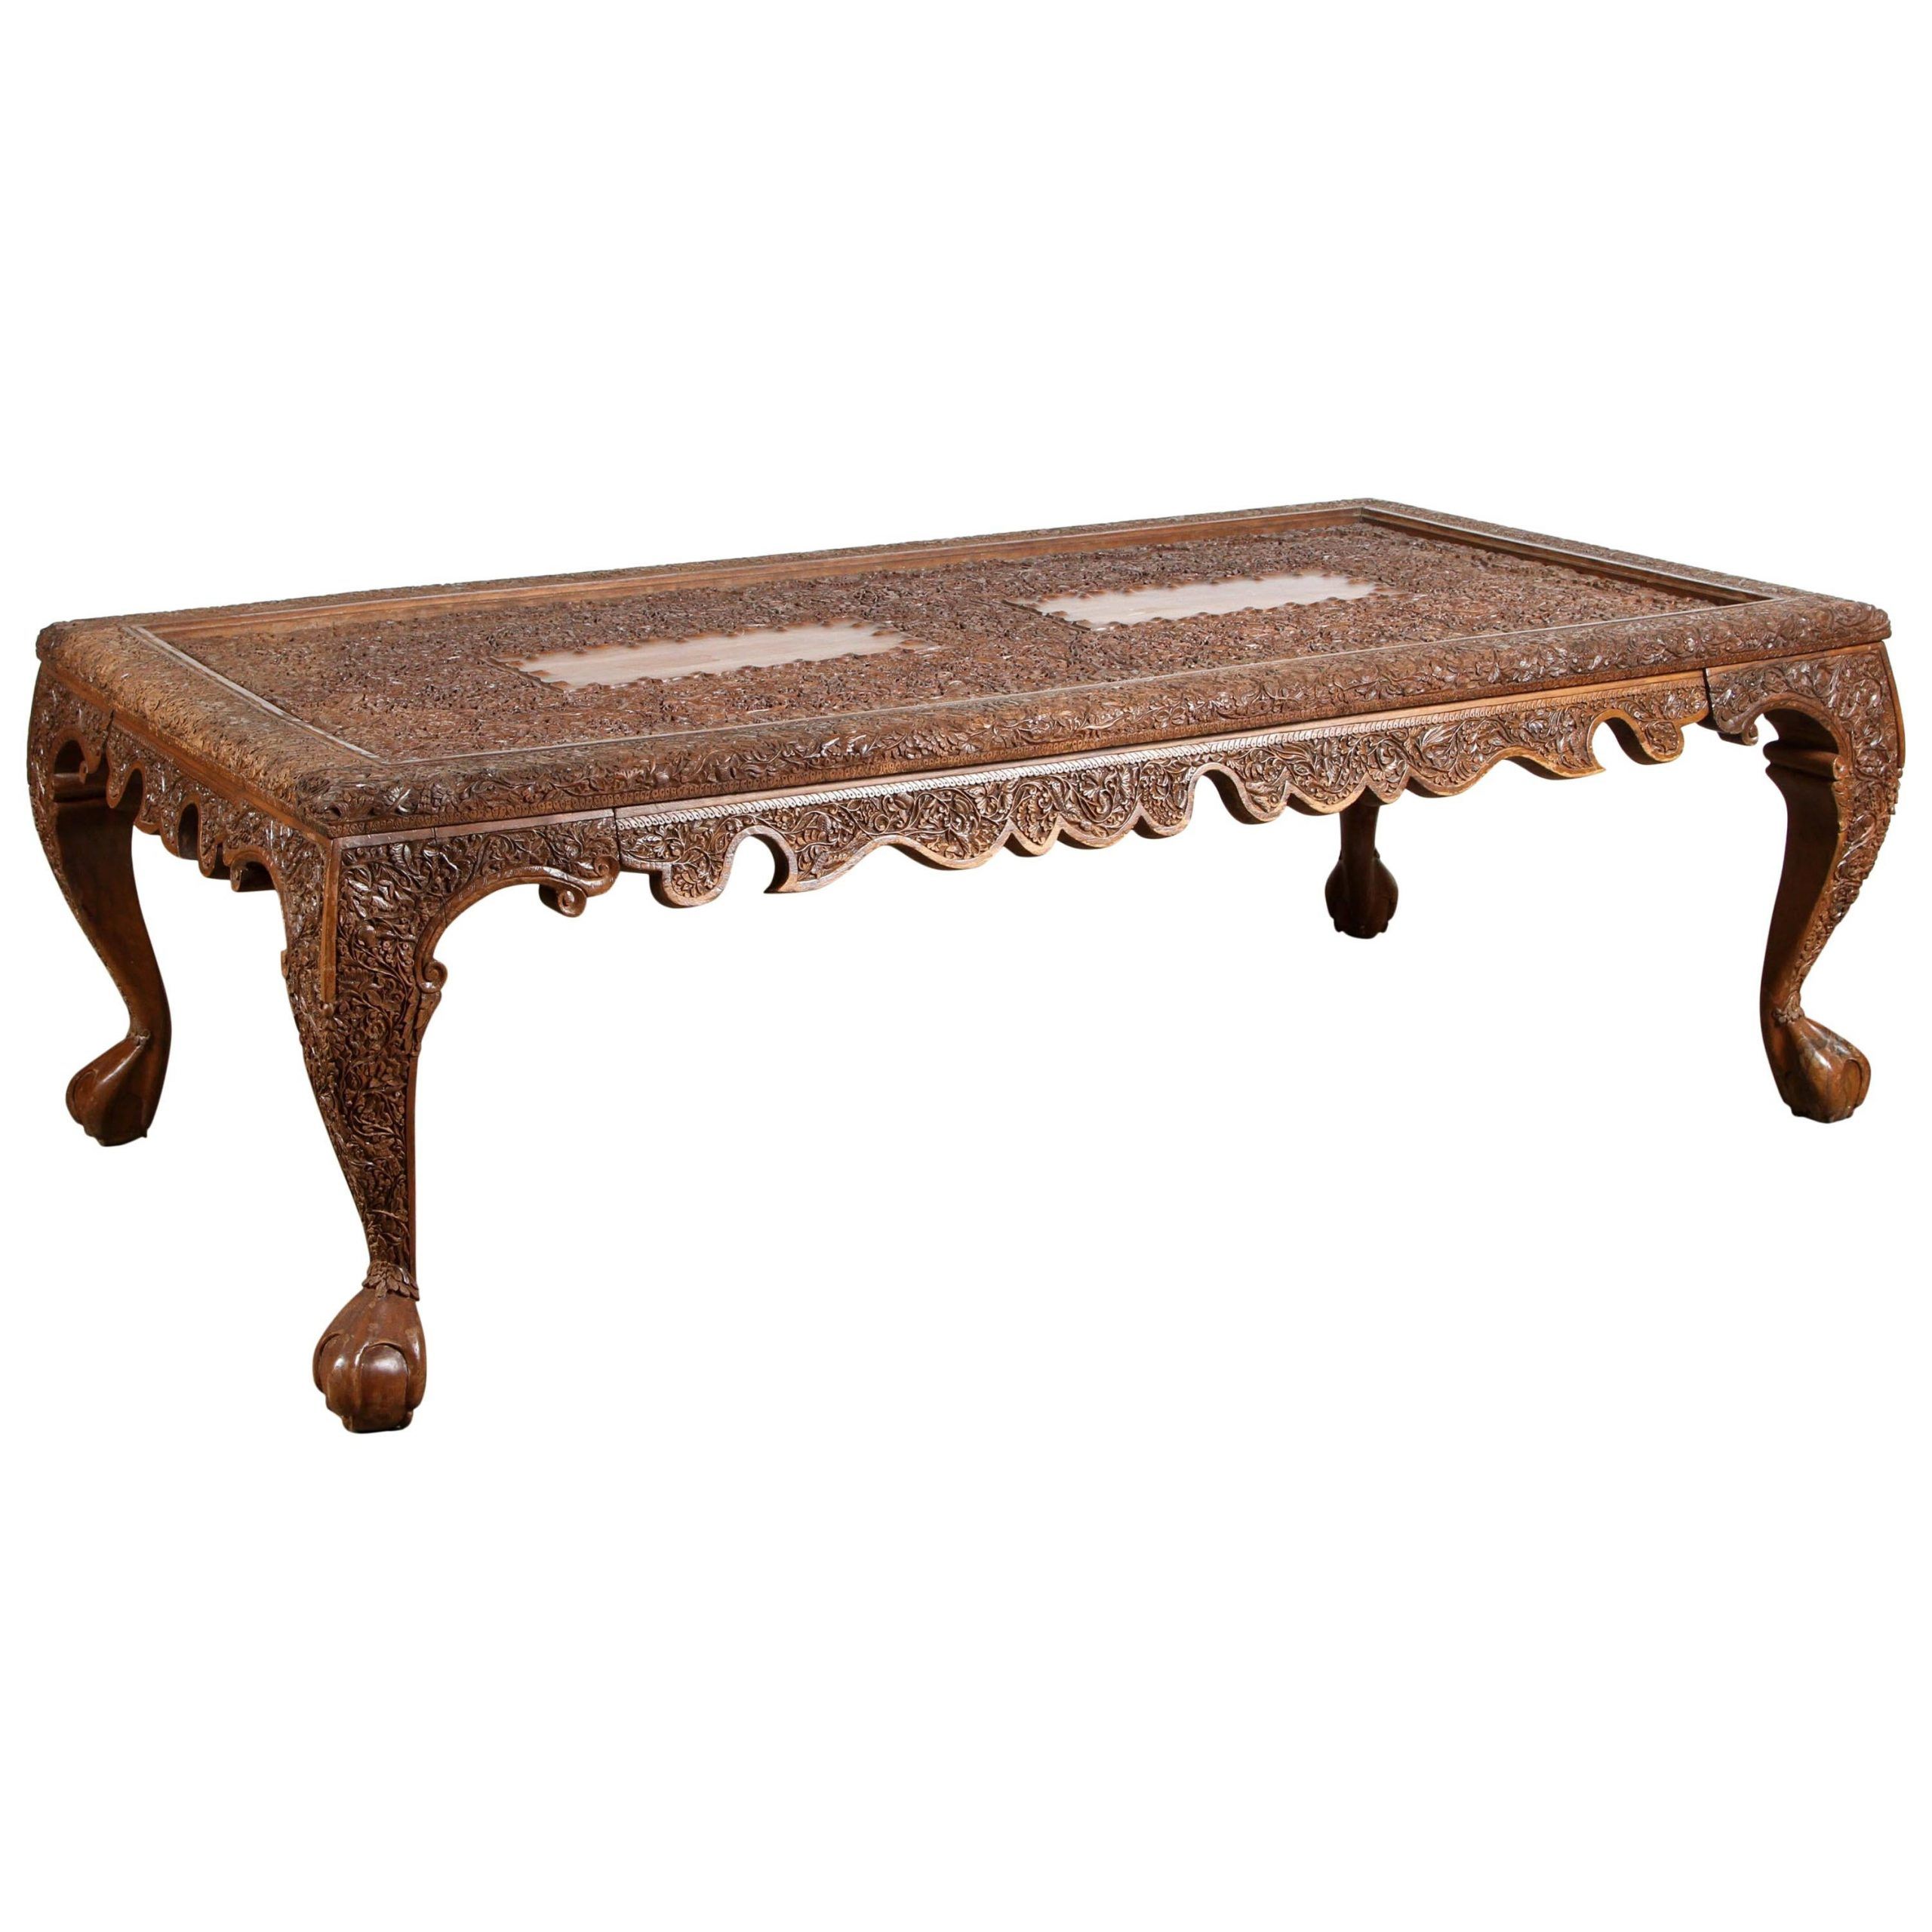 Asian Wood Hand Crafted Coffee Table For Sale At 1stdibs Regarding Wooden Hand Carved Coffee Tables (View 8 of 15)